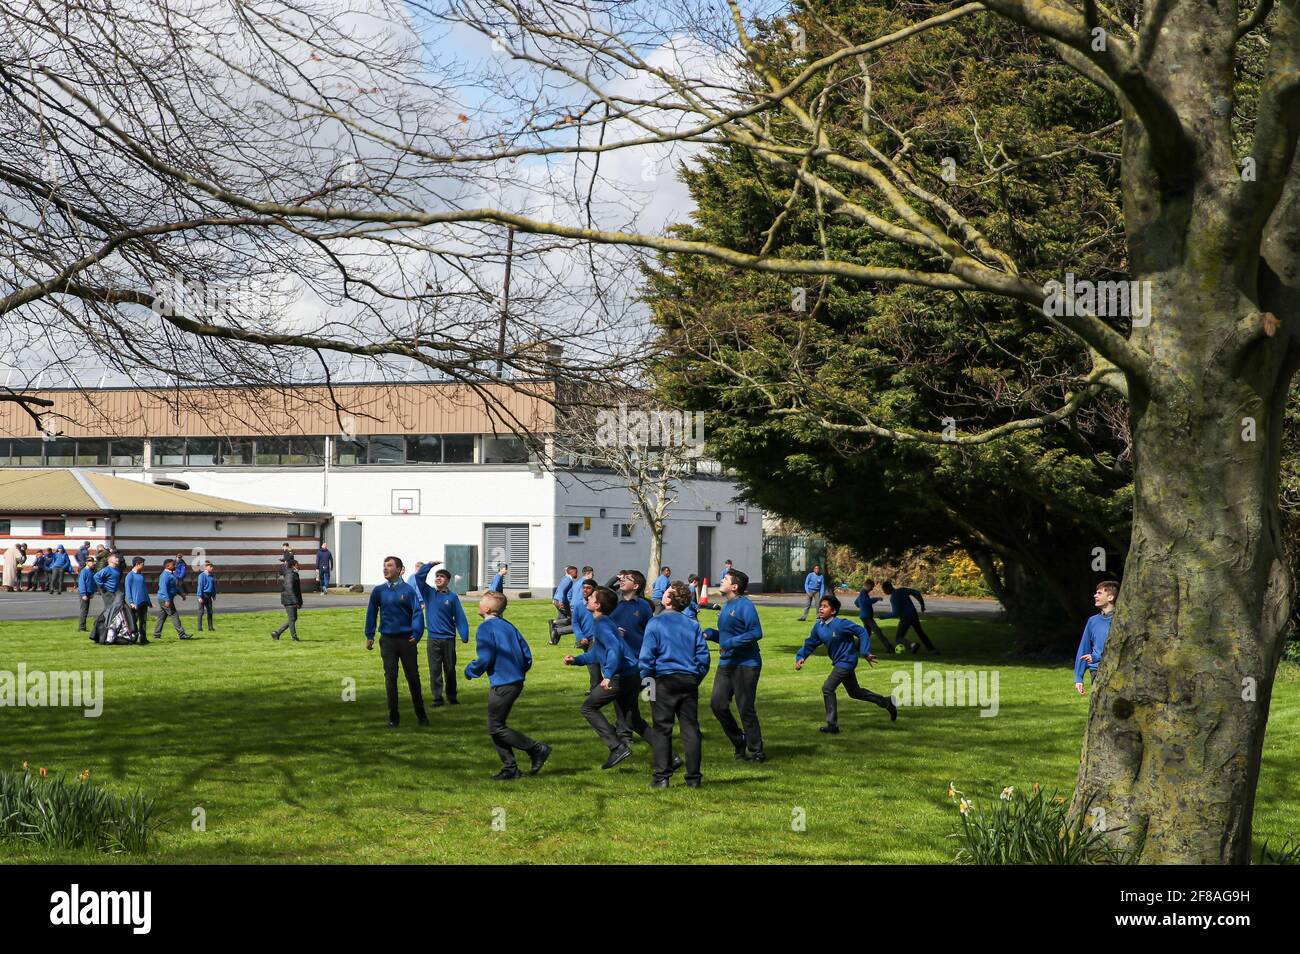 Dublin. 13th Apr, 2021. Students play in a reopened school in Dublin, Ireland, April 12, 2021. Ireland on Monday started to ease some of its COVID-19 restrictions as scheduled. People are allowed to travel freely within the county where they live or within 20 kilometers from their home, with outdoor gatherings permitted for no more than two households, in-classroom education for all primary and secondary school students resumed, and all residential construction projects reopened. Credit: Xinhua/Alamy Live News Stock Photo